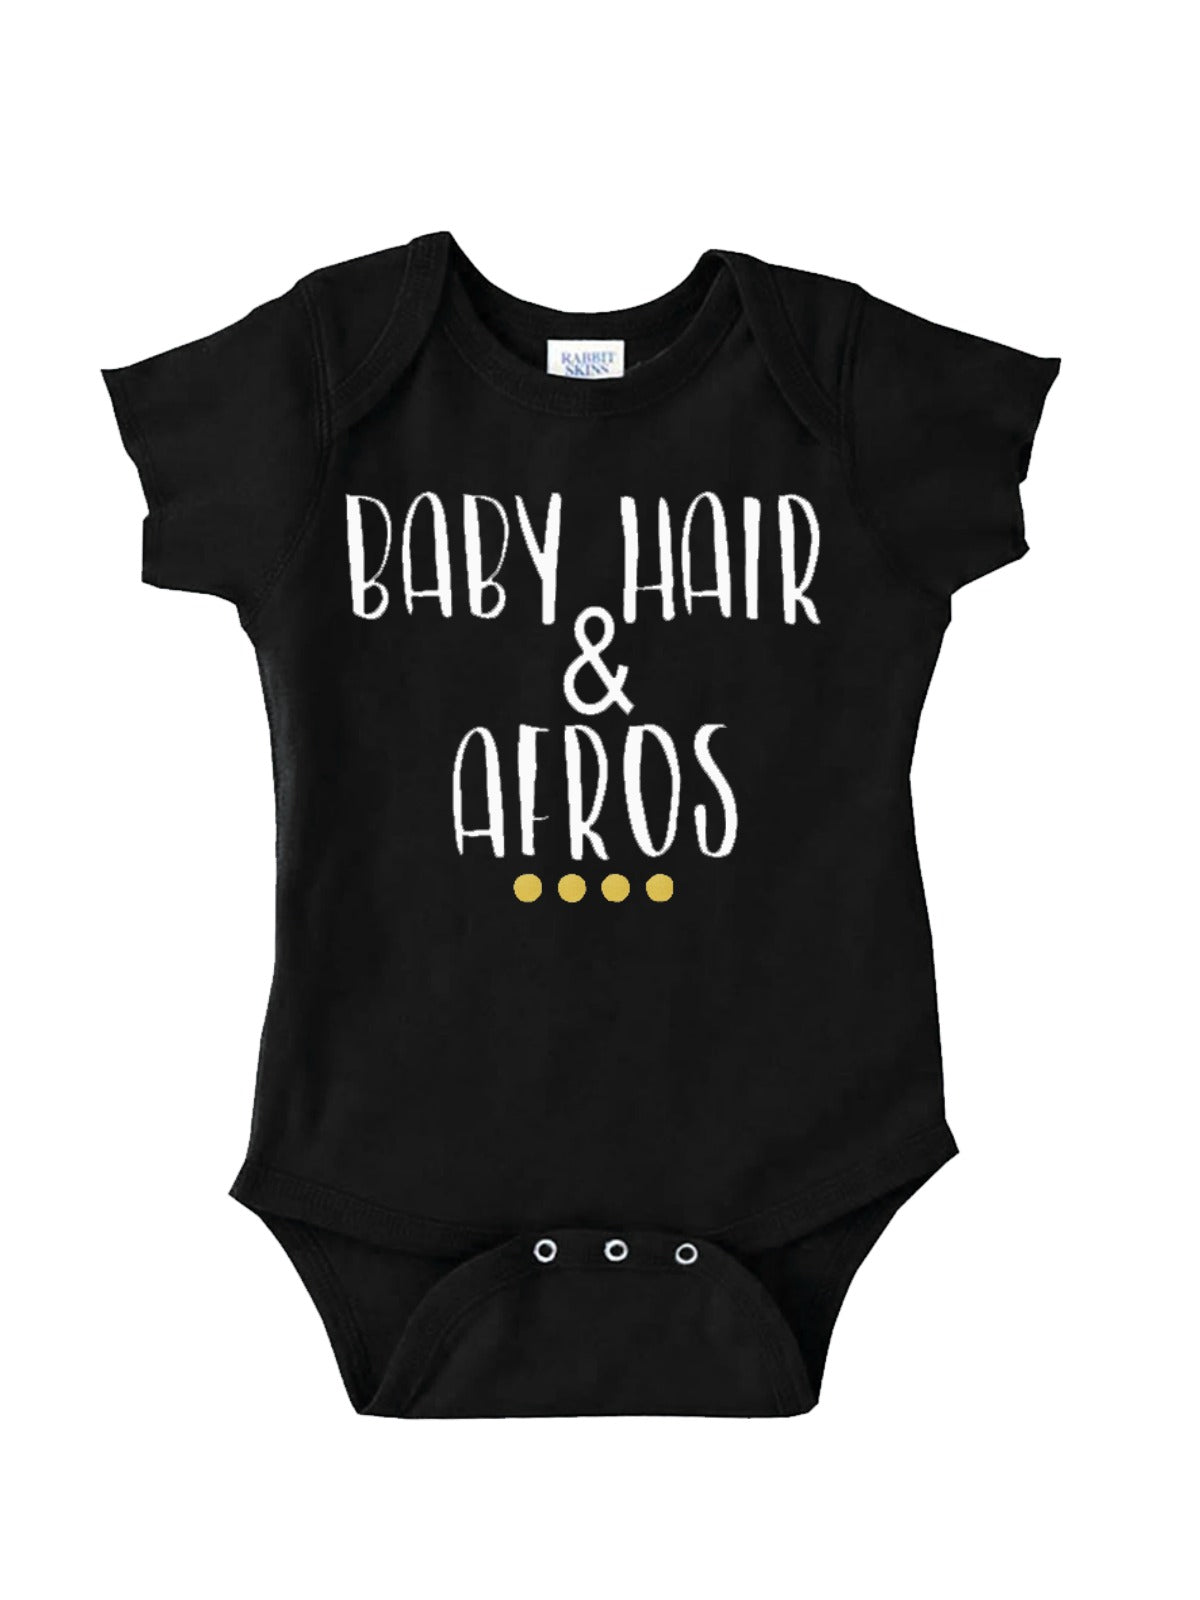 Baby hair and afros baby bodysuit in black.